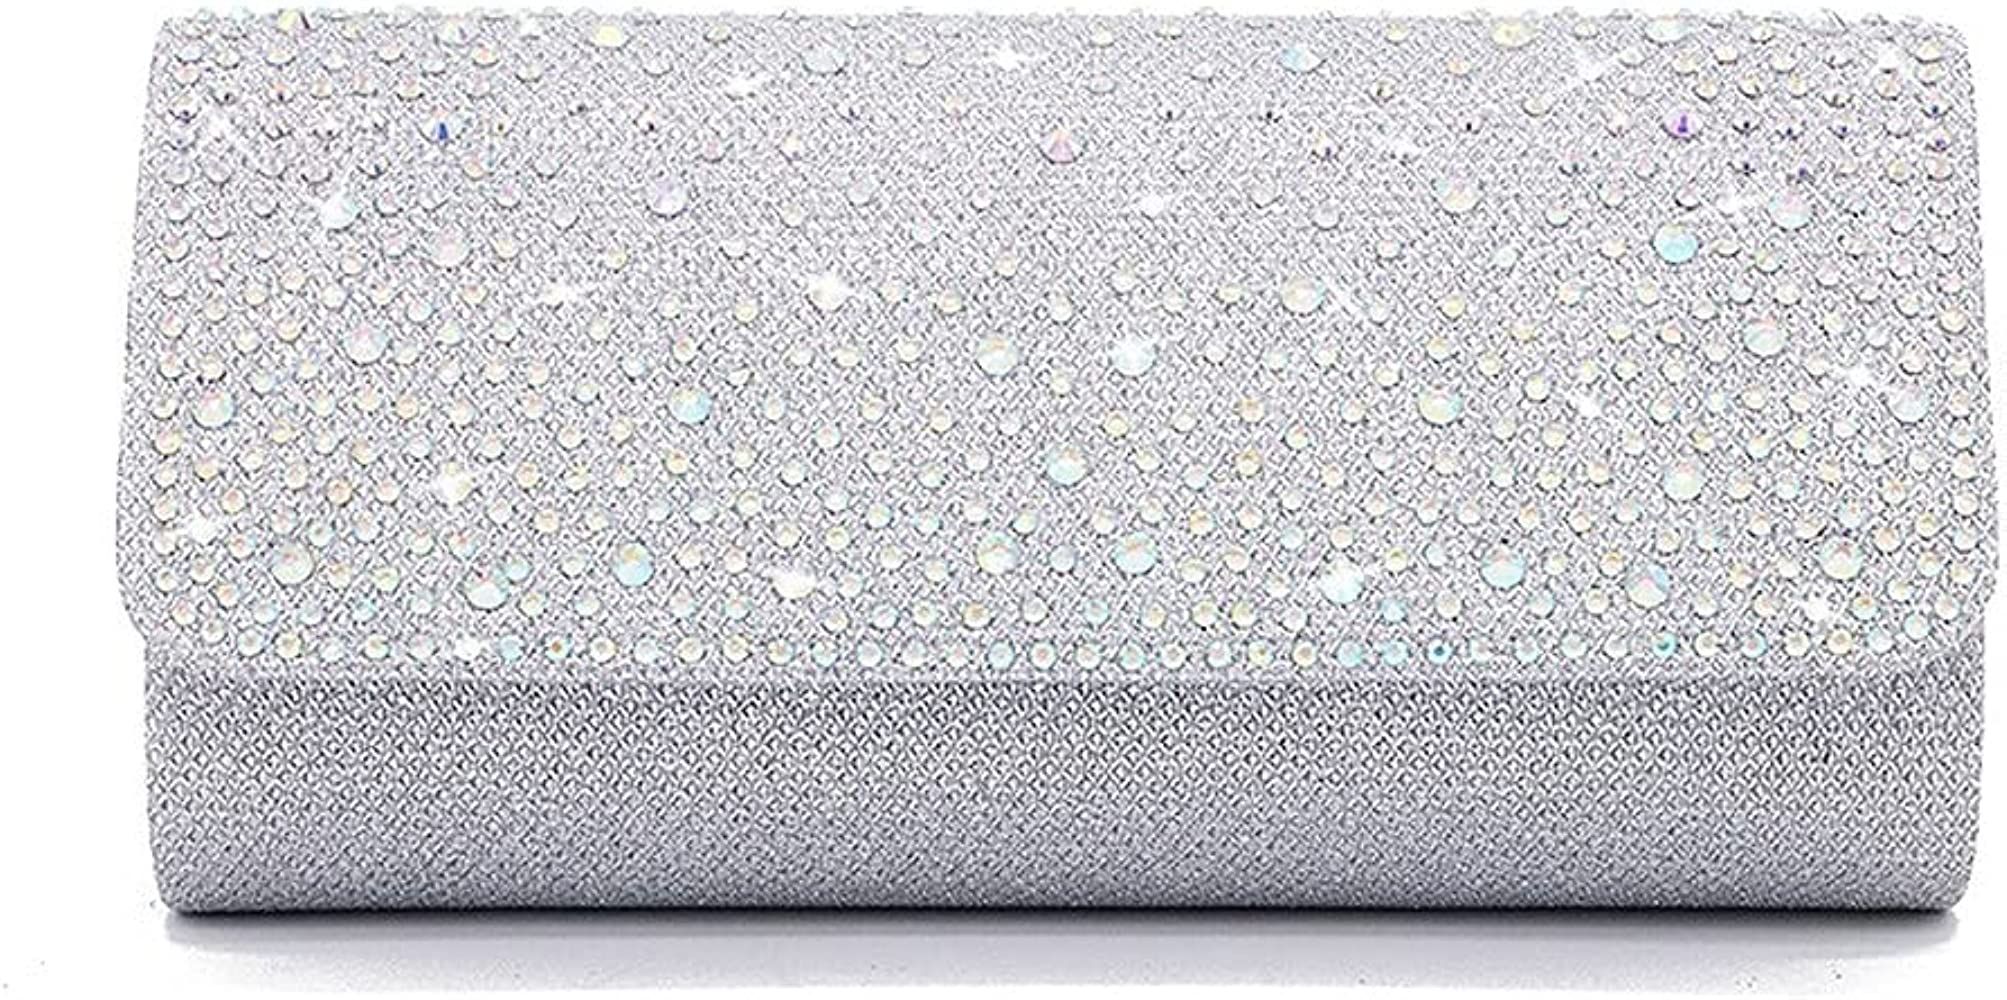 Bling Crystal Clutch Purses for Women Evening Bags Formal Party Rhinestone Handbags | Amazon (US)